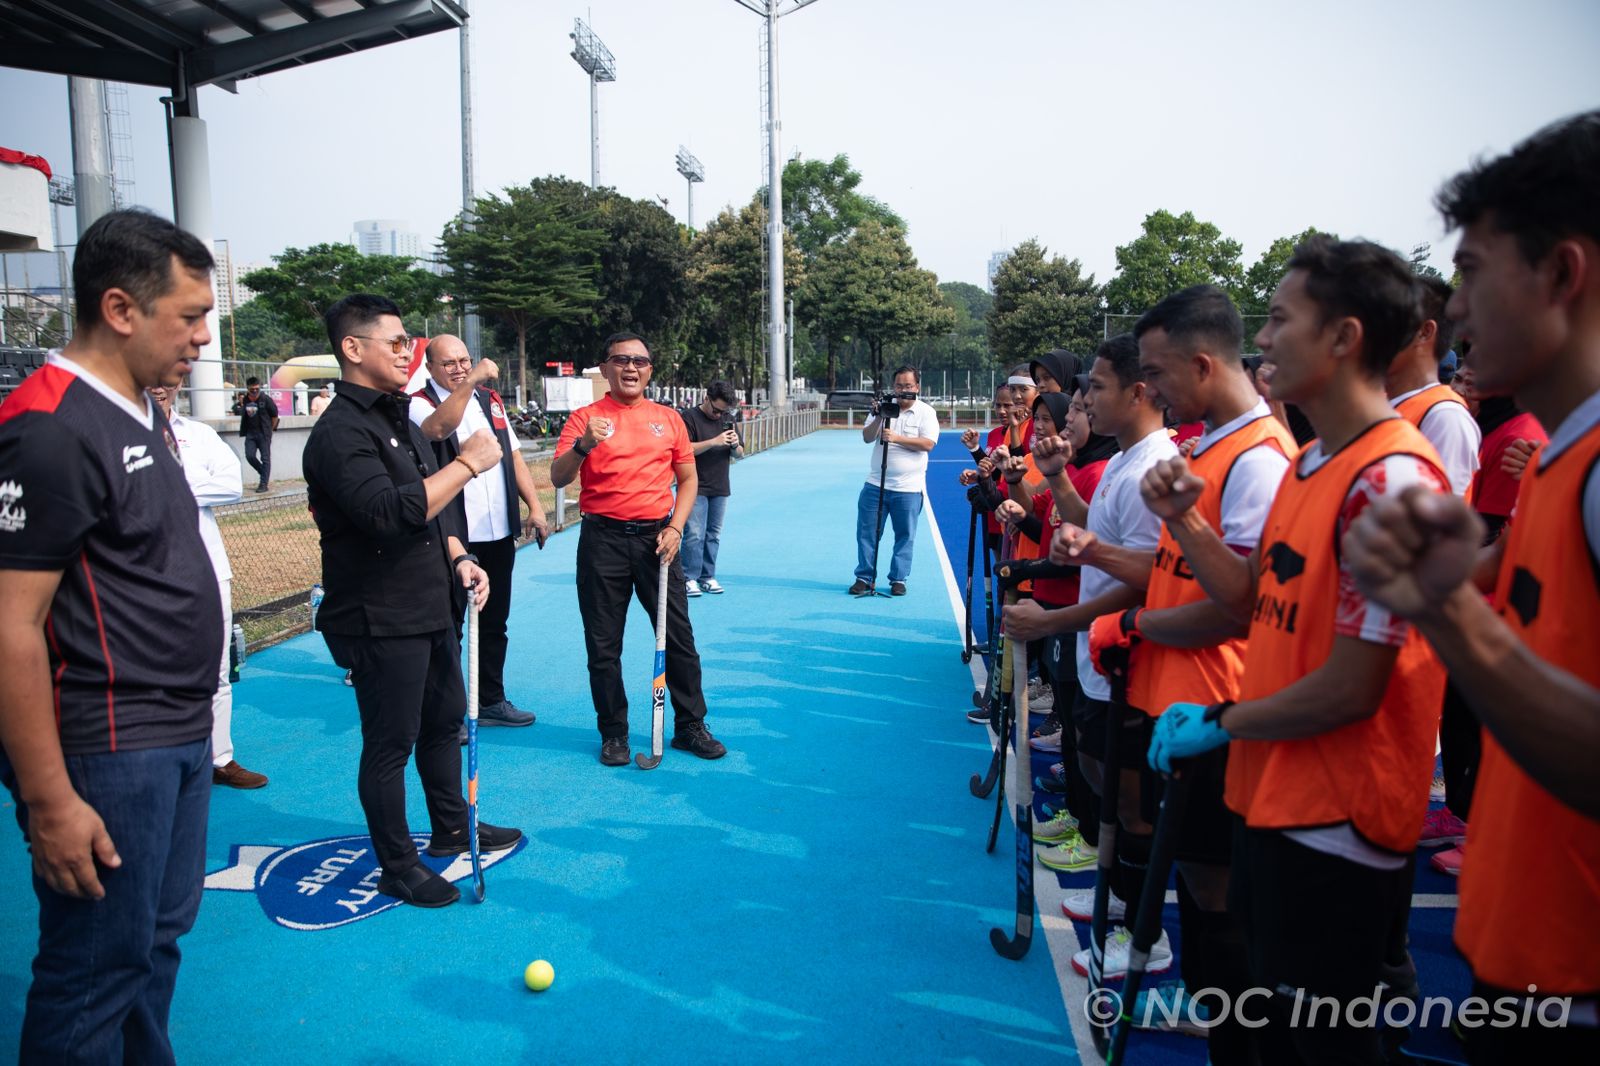 History beckons as Indonesia Hockey Team gear up for the upcoming Asian Games - Indonesia Olympic Commitee